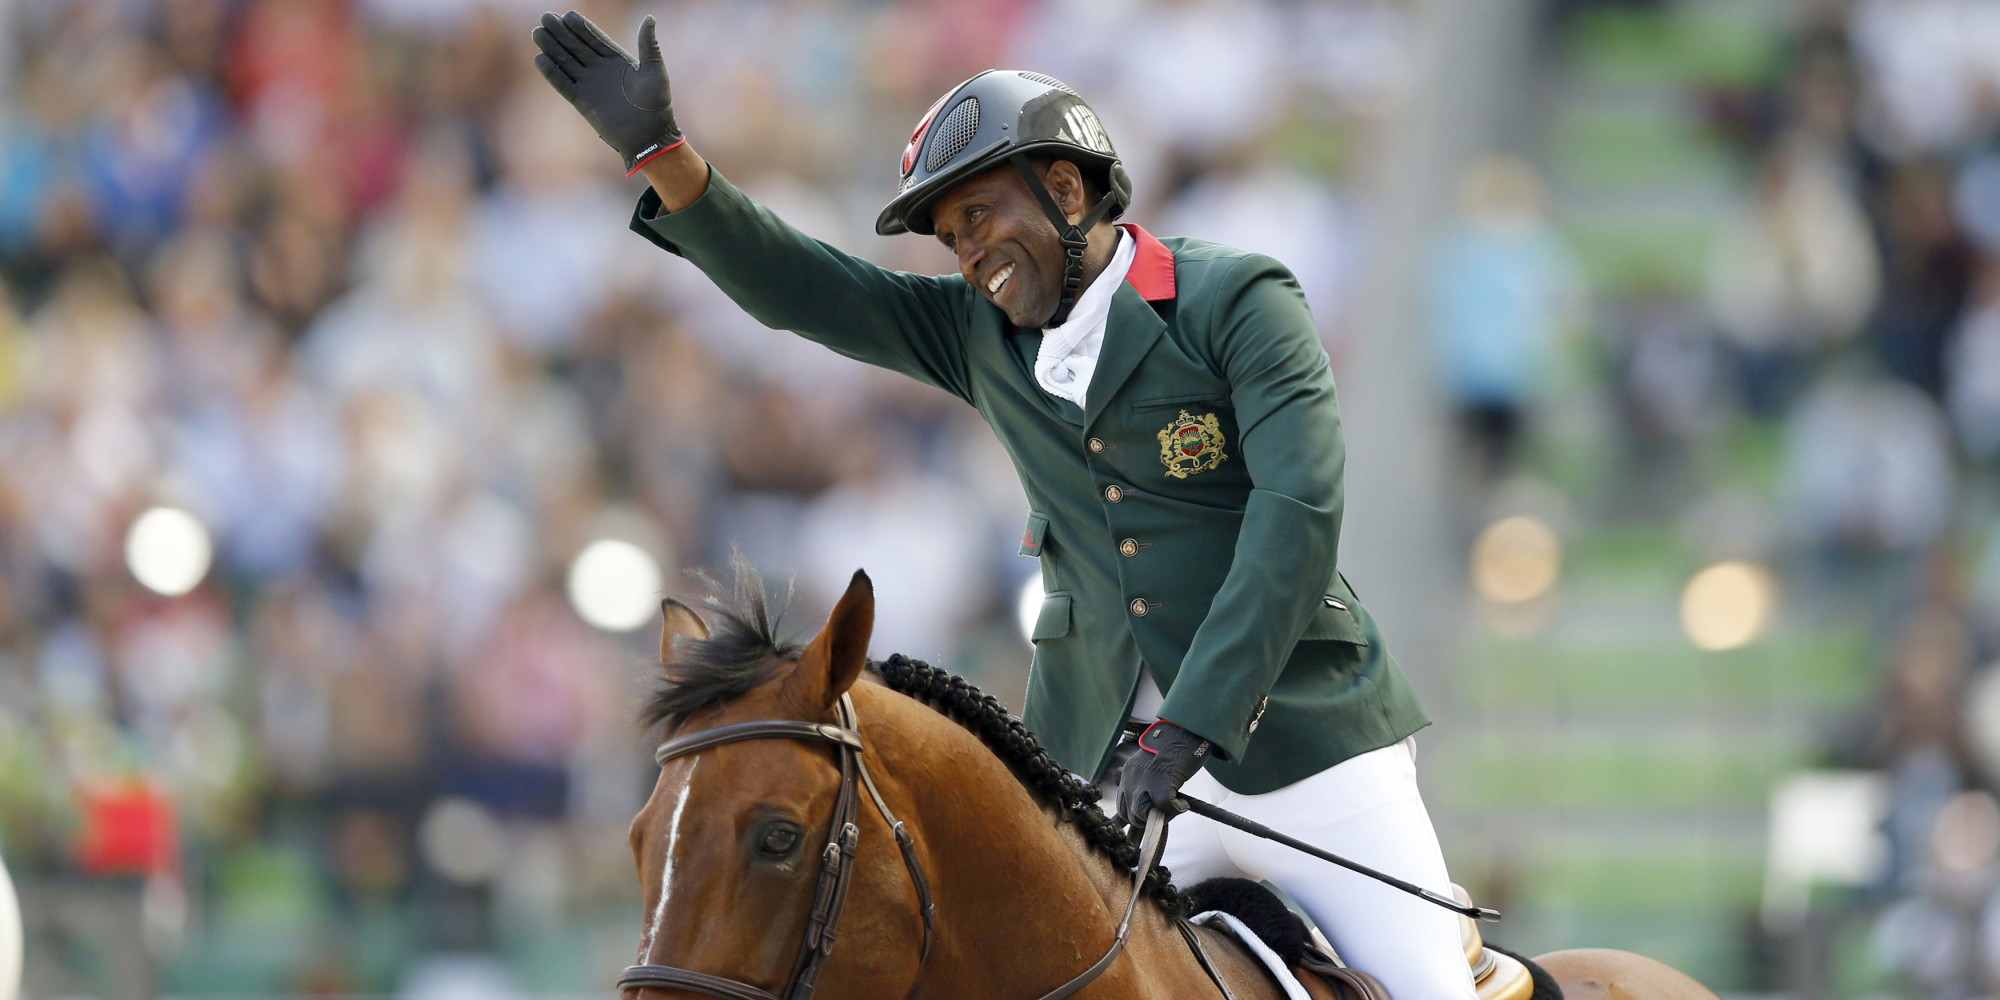 Abdelkebir Ouaddar of Morocco riding Quickly De Kreisker celebrates during the individual second round event of the Jumping Competition at the World Equestrian Games in Caen, September 4, 2014. REUTERS/Regis Duvignau (FRANCE - Tags: SPORT EQUESTRIANISM ANIMALS)